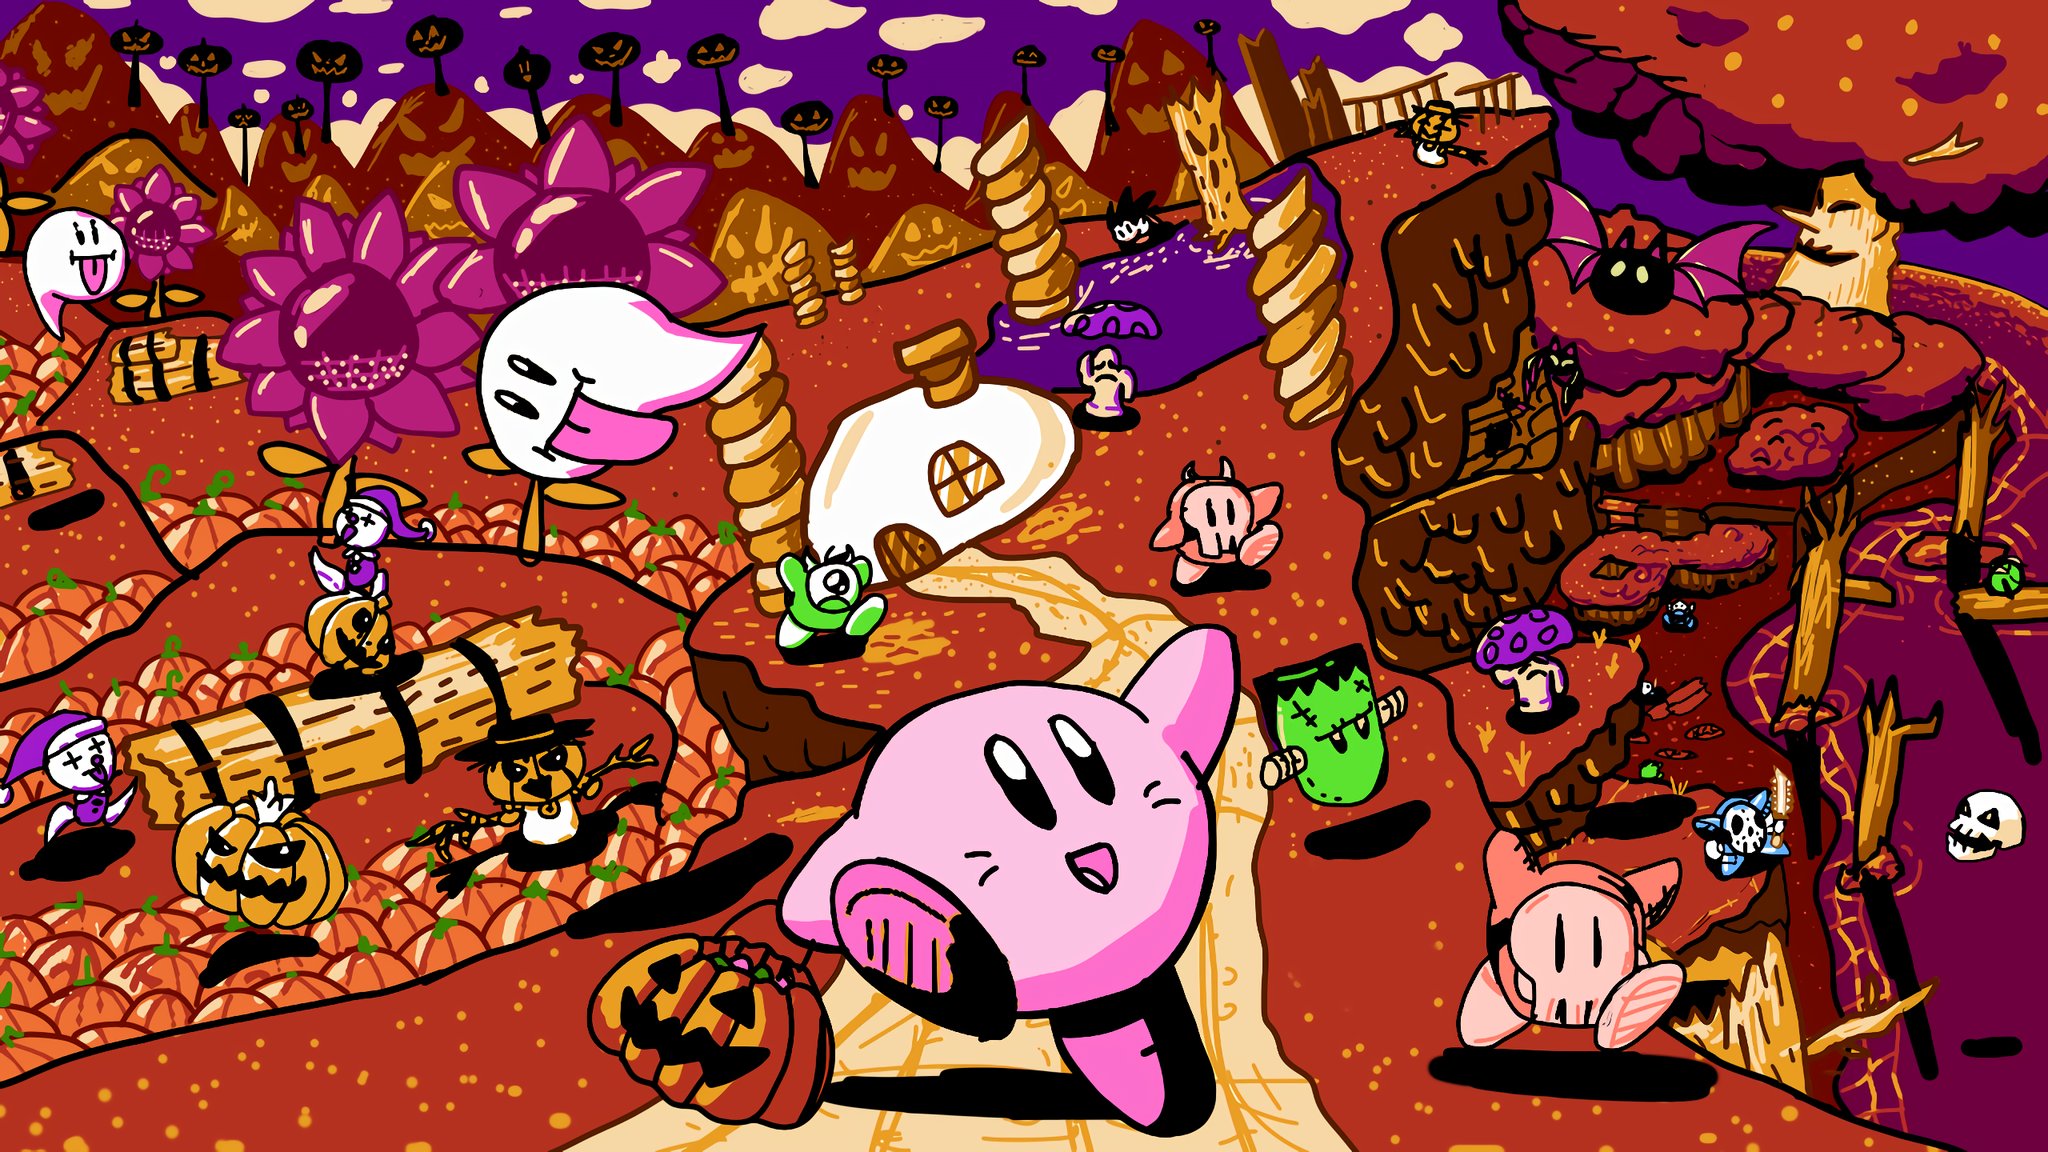 New Patreon Kirby Wallpaper for the spooky season! Full HD version